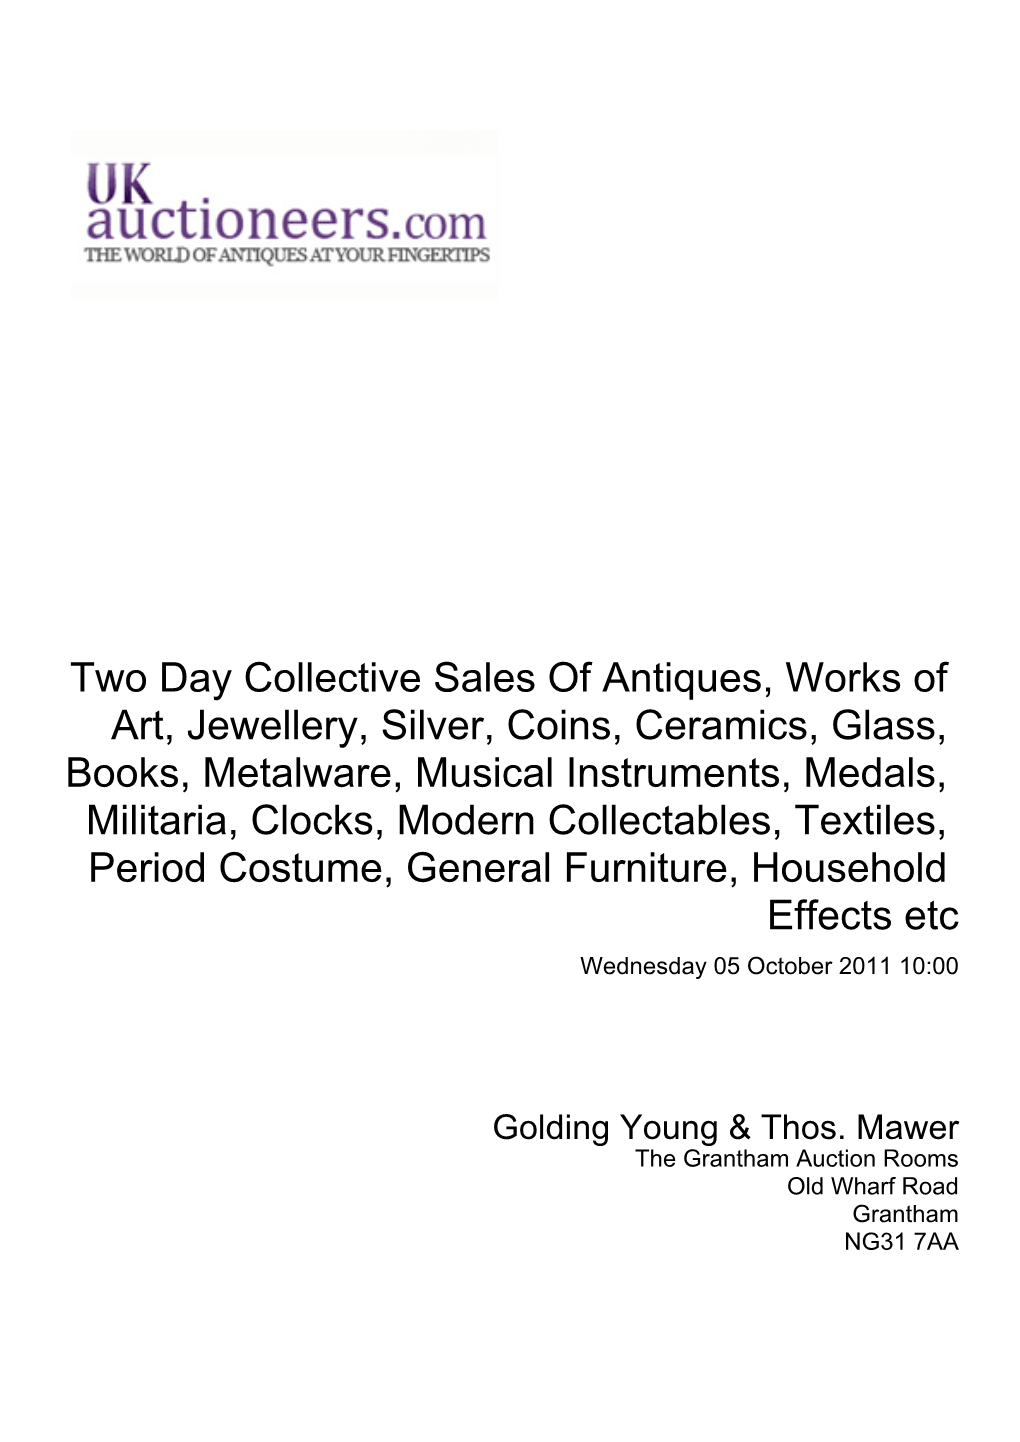 Two Day Collective Sales of Antiques, Works of Art, Jewellery, Silver